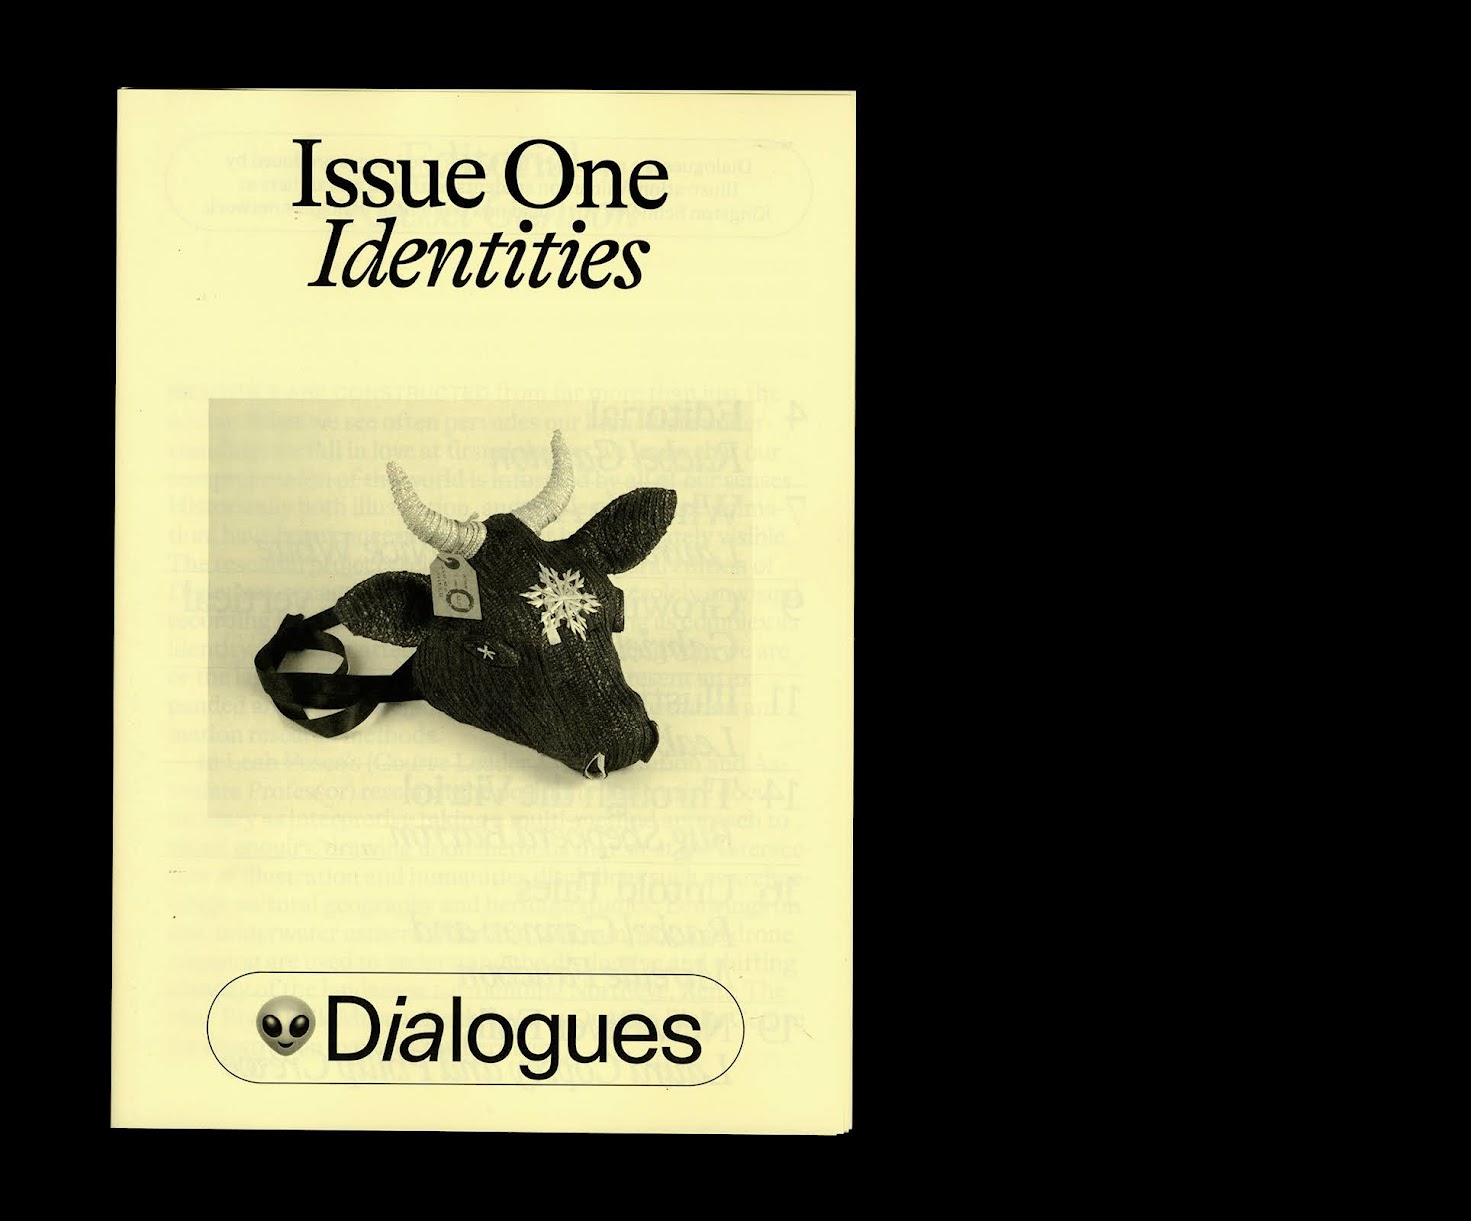 Scan shows publication cover printed on light yellow paper. Title in large serif type reads: Issue One / Identities / Dialogues